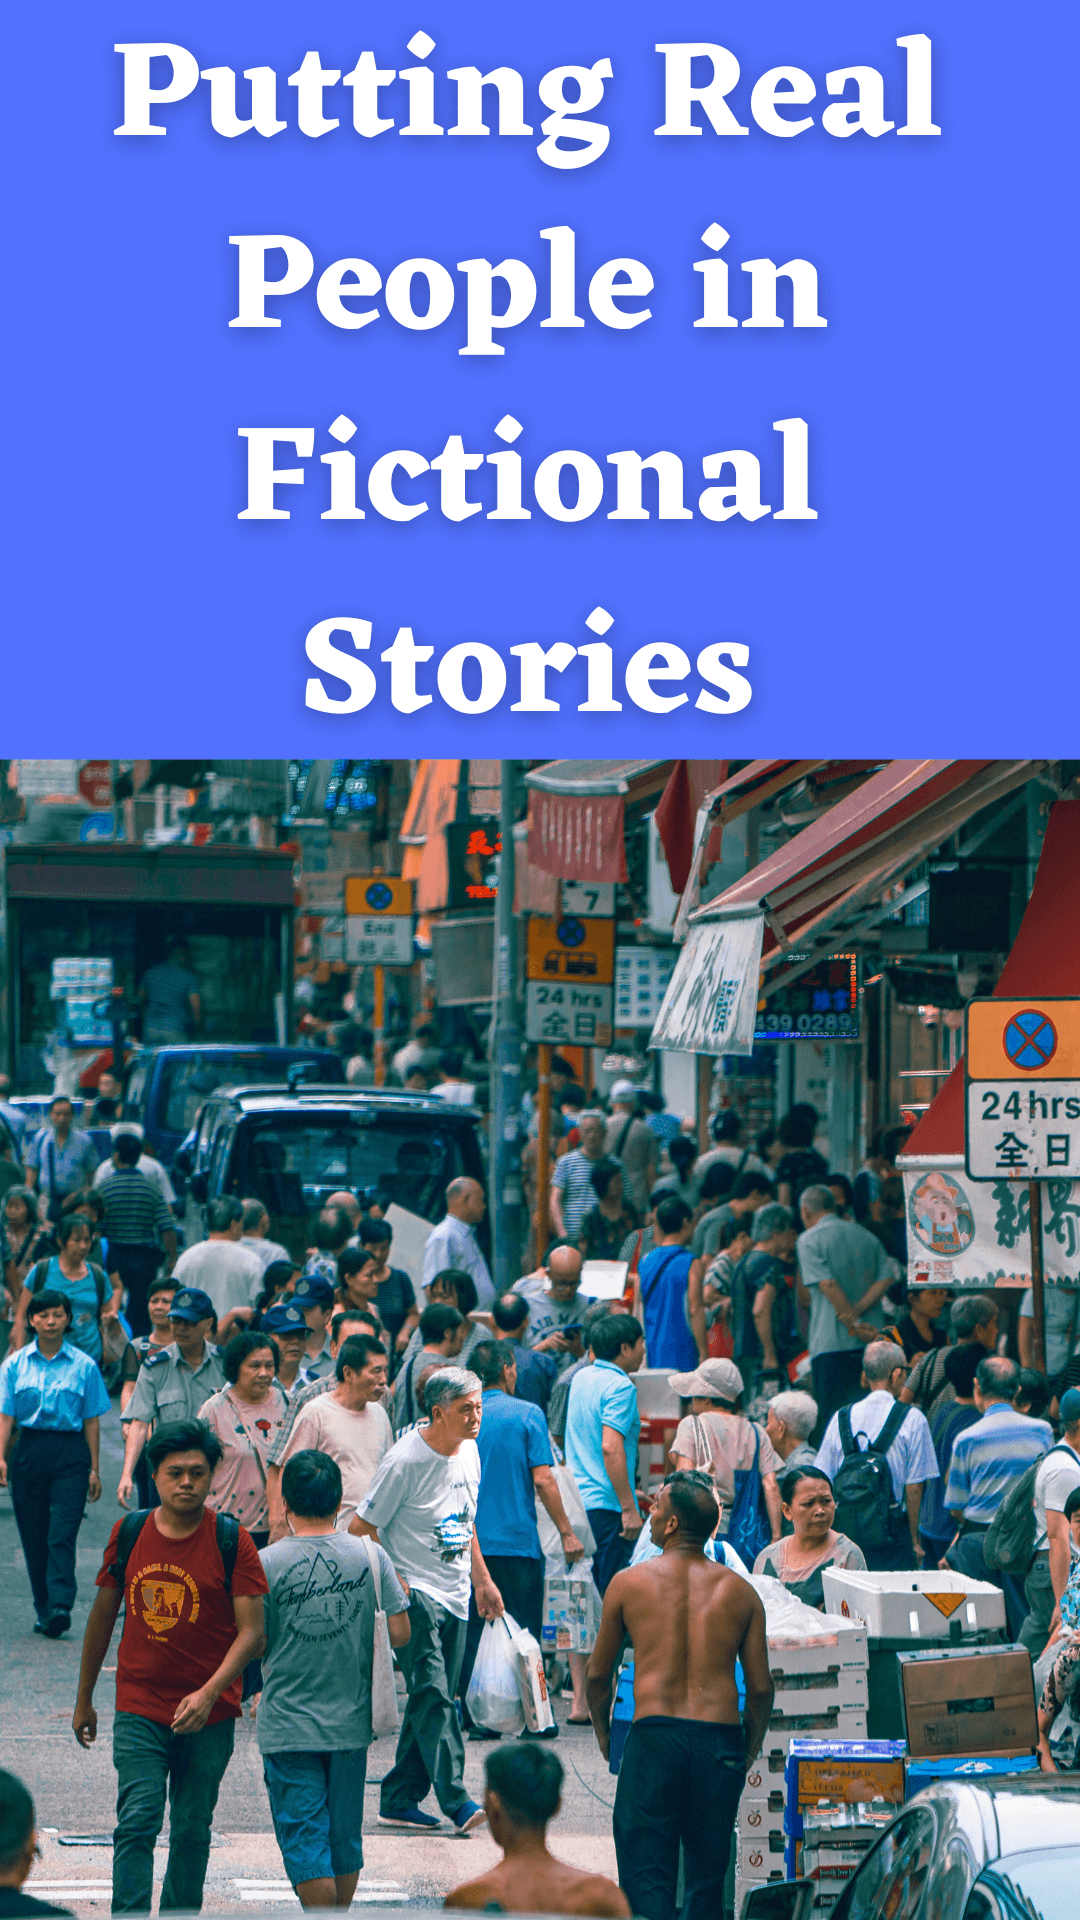 Pitfalls and benefits of putting real people into fiction.